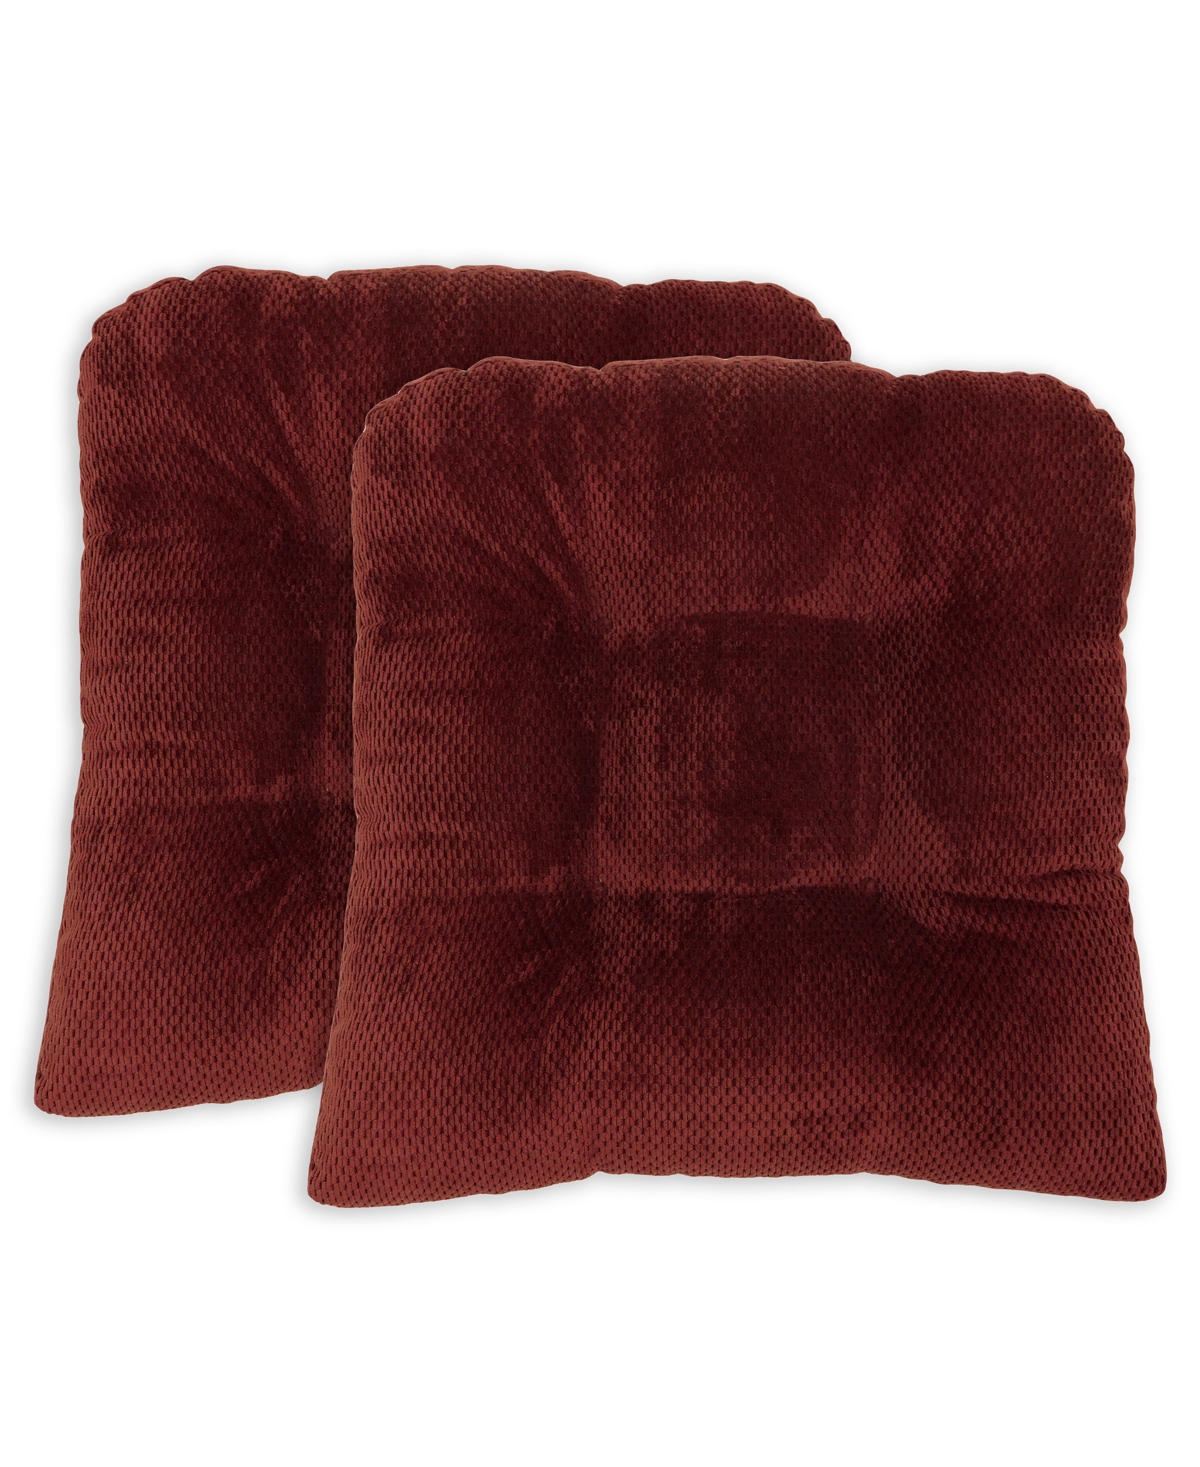 Shop Arlee Home Fashions Delano Set Of Two Chair Pad Seat Cushions In Red